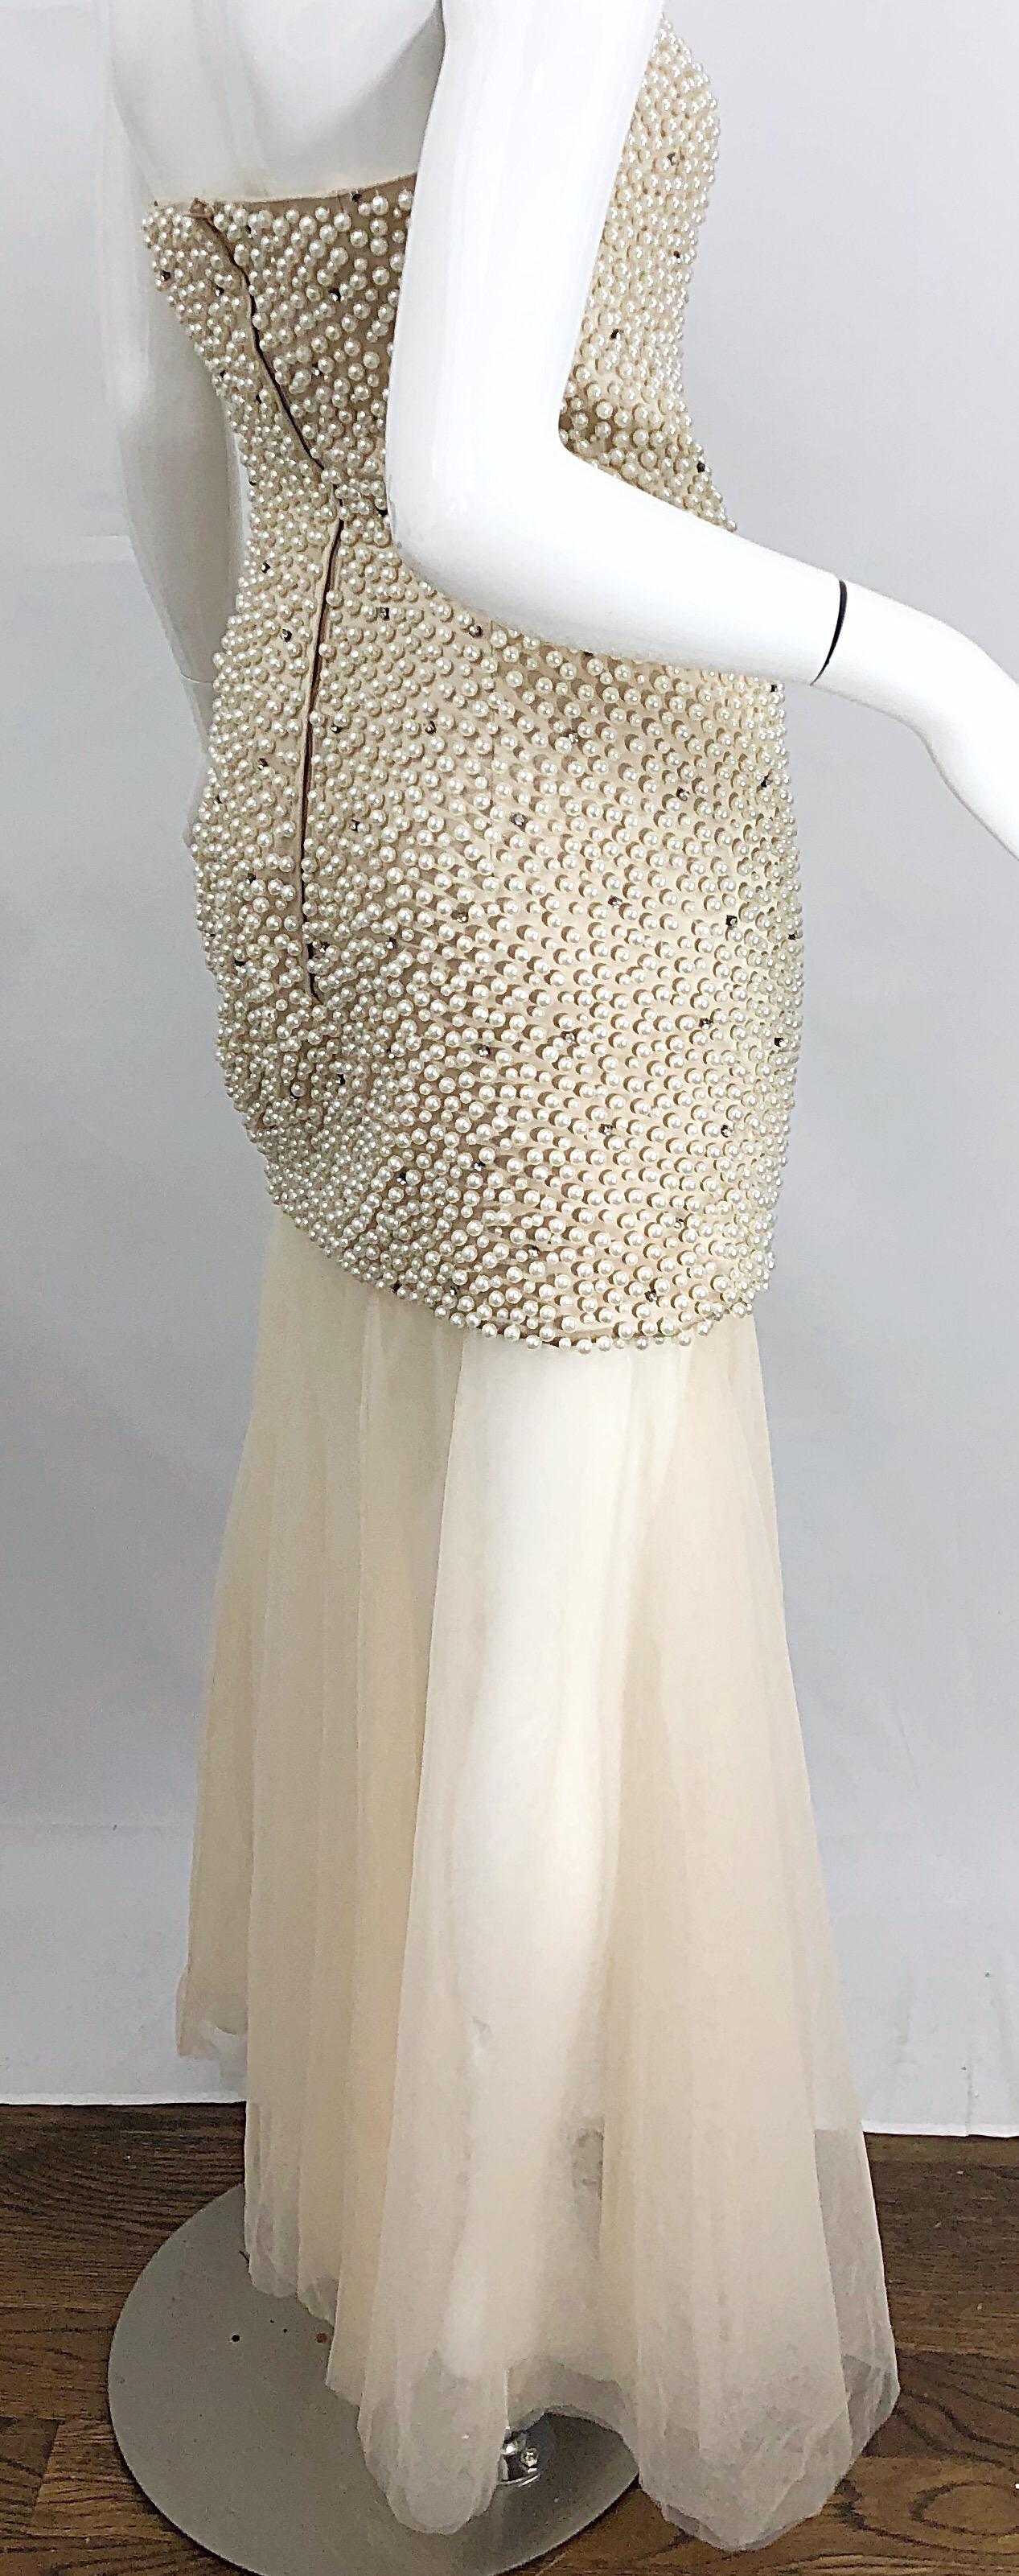 Phenomenal 1980s Couture Pearl + Rhinestone Encrusted Strapless Beige 80s Gown 2